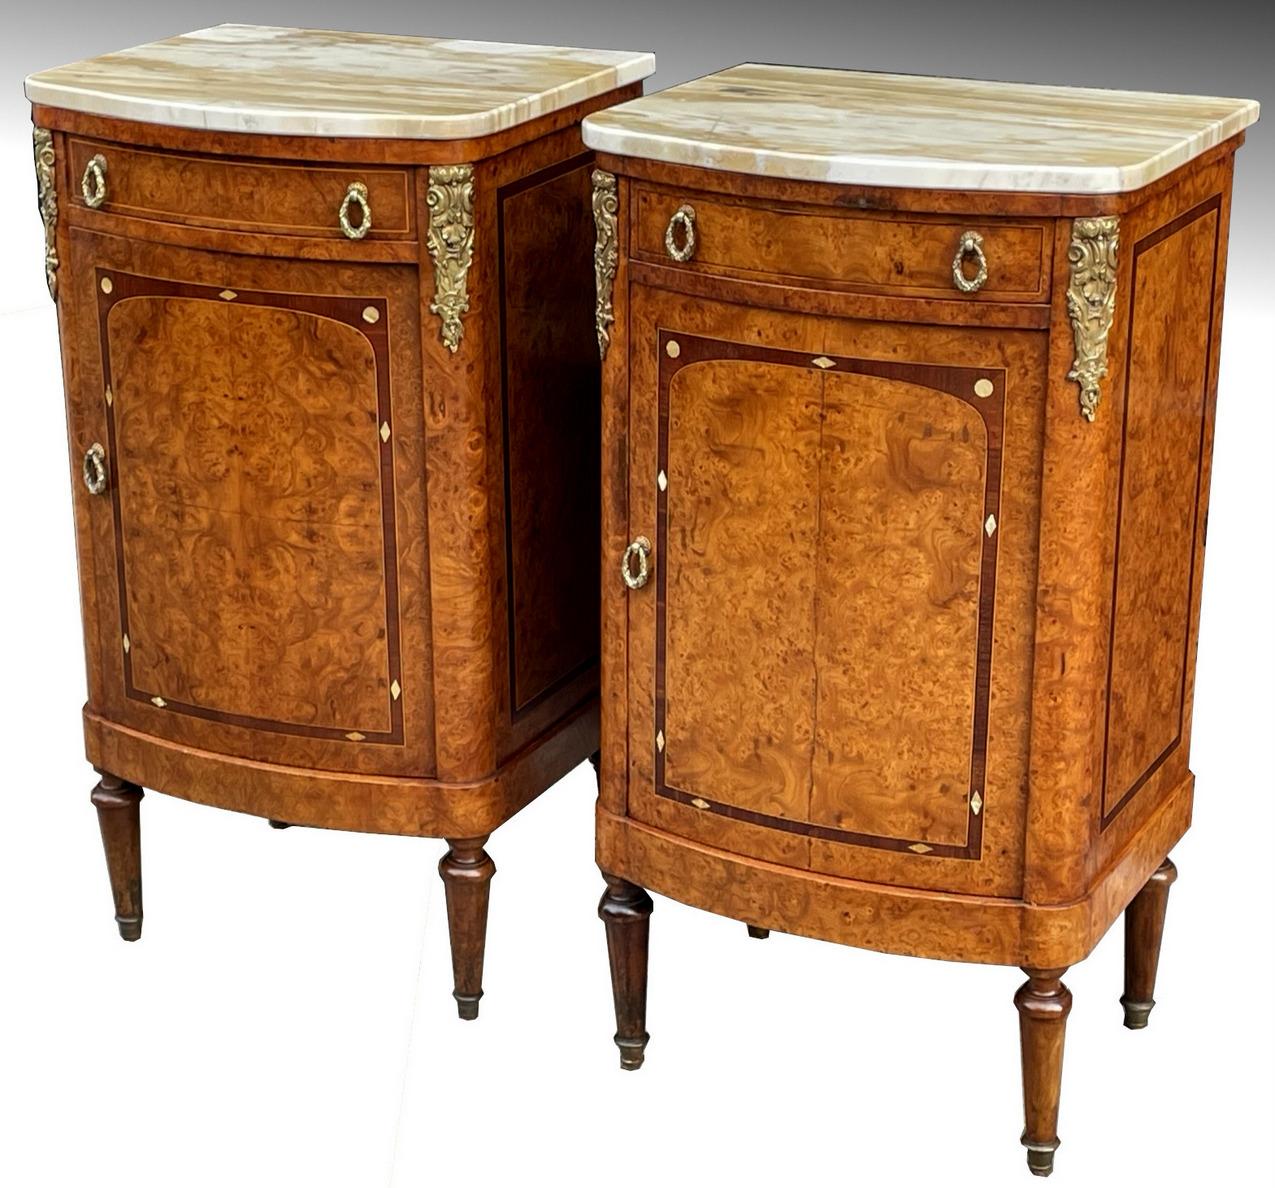 Stunning Identical Pair of French bow front Santos Mahogany with well veined marble topped Bedside Lockers Nightstands of outstanding quality, last quarter of the Nineteenth Century, made by Edinburgh Cabinet Makers J & T Scott 10 George Street.